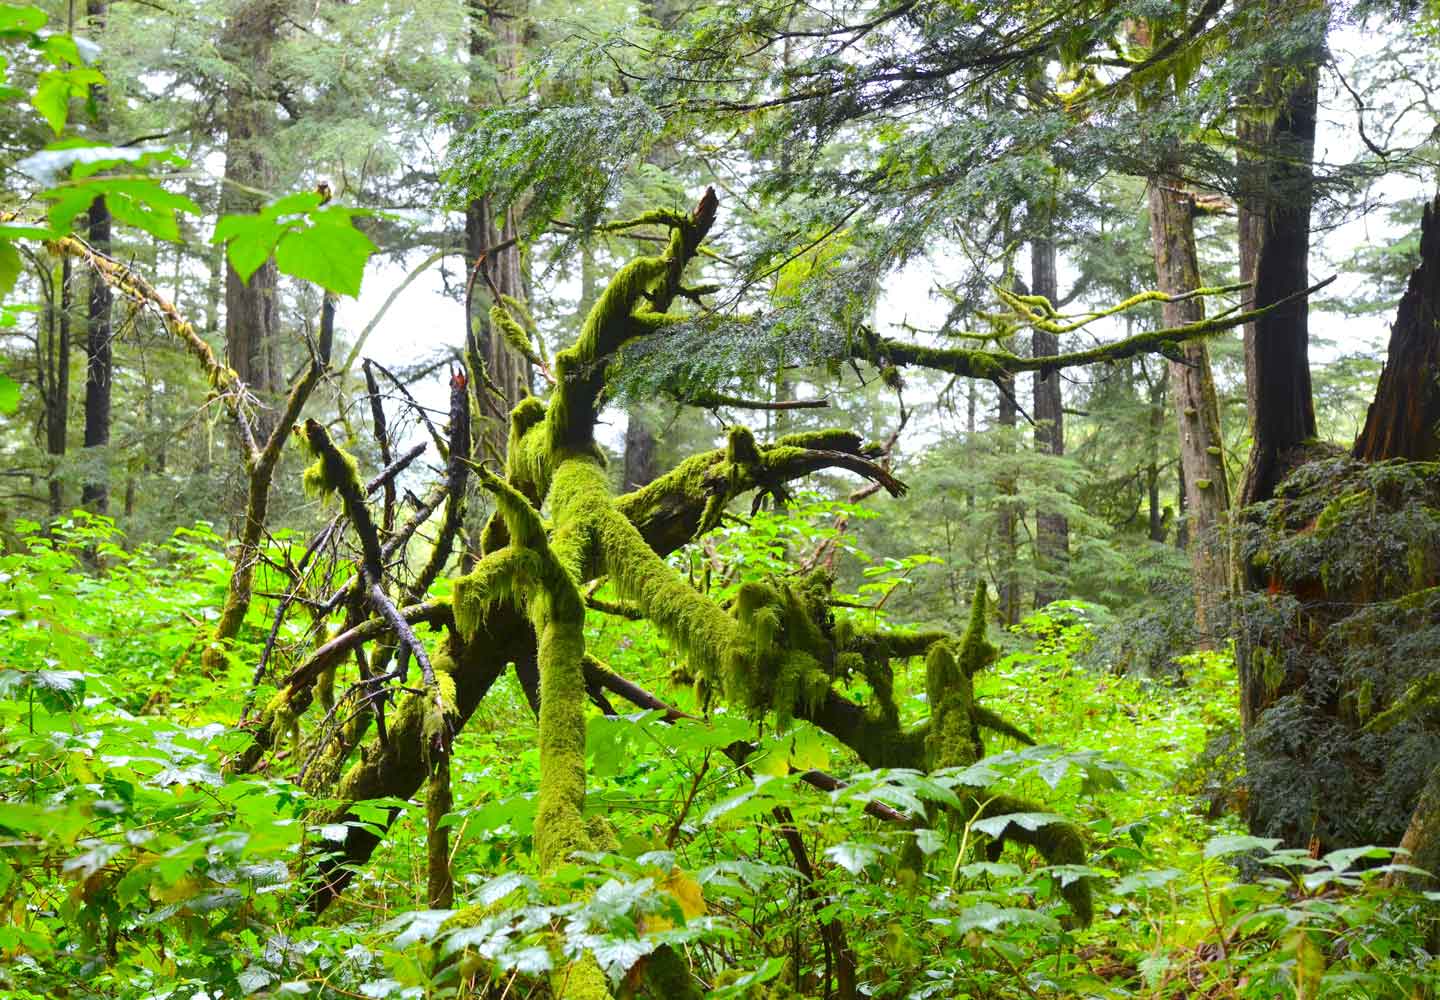 Take some time to check out the stunning forests around Sitka, after all, Alaska's famous Sitka Spruce is named for the trees growing in these beautiful forests.